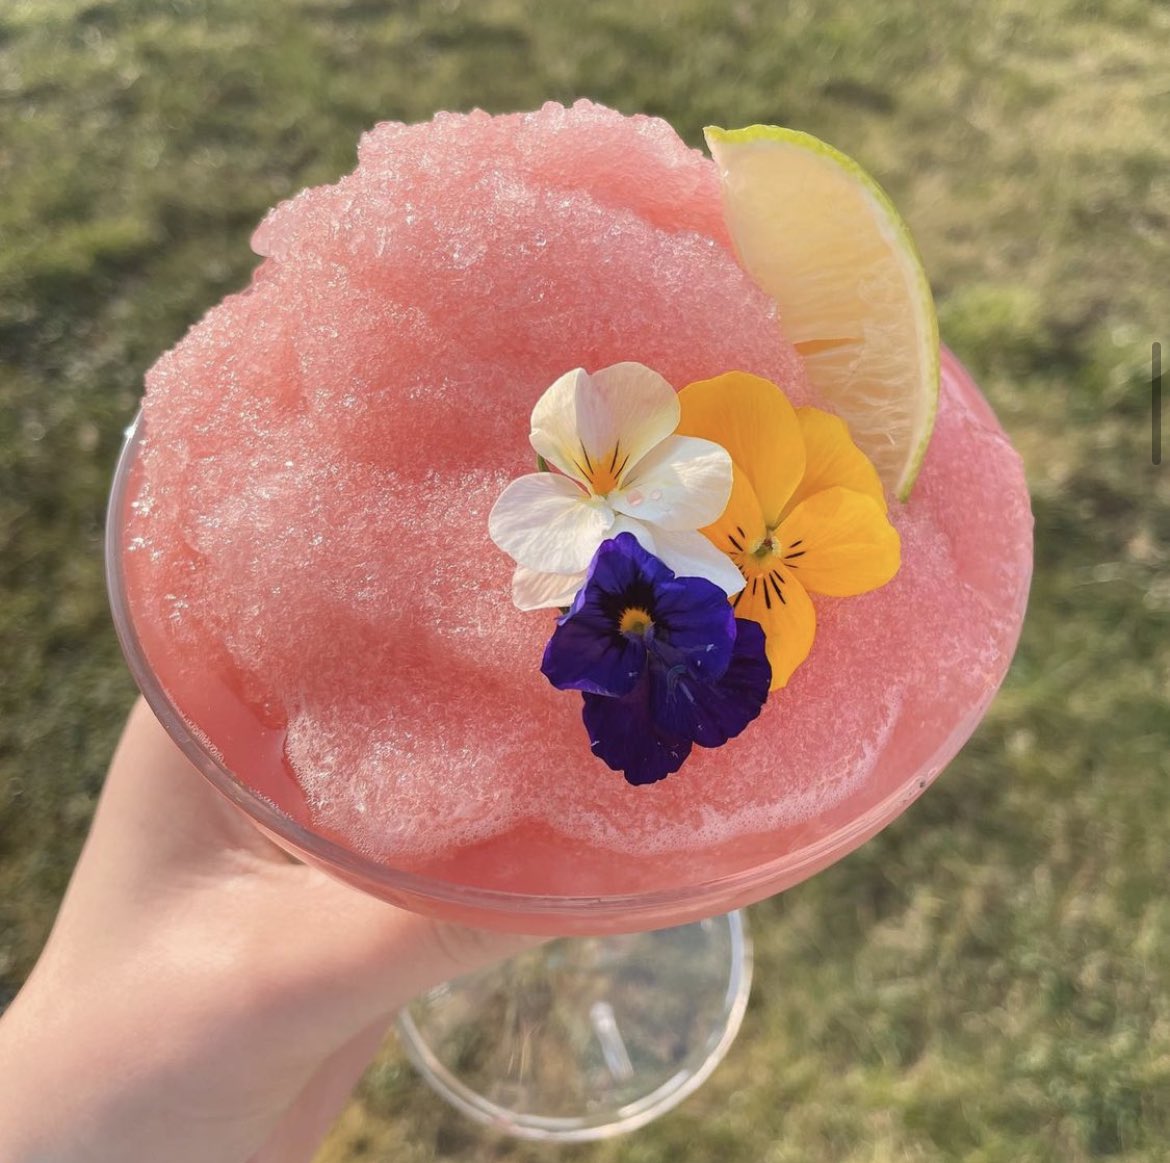 POV: it’s the Easter bank holiday weekend, the sun is shining and you have a frozen Funkin cocktail in hand… life’s good 😎 📸 @cocktailswitheleanor #ItsFunkinTime #bankholiday #easterweekend #frozencocktails #funkincocktails #feelgoodfriday